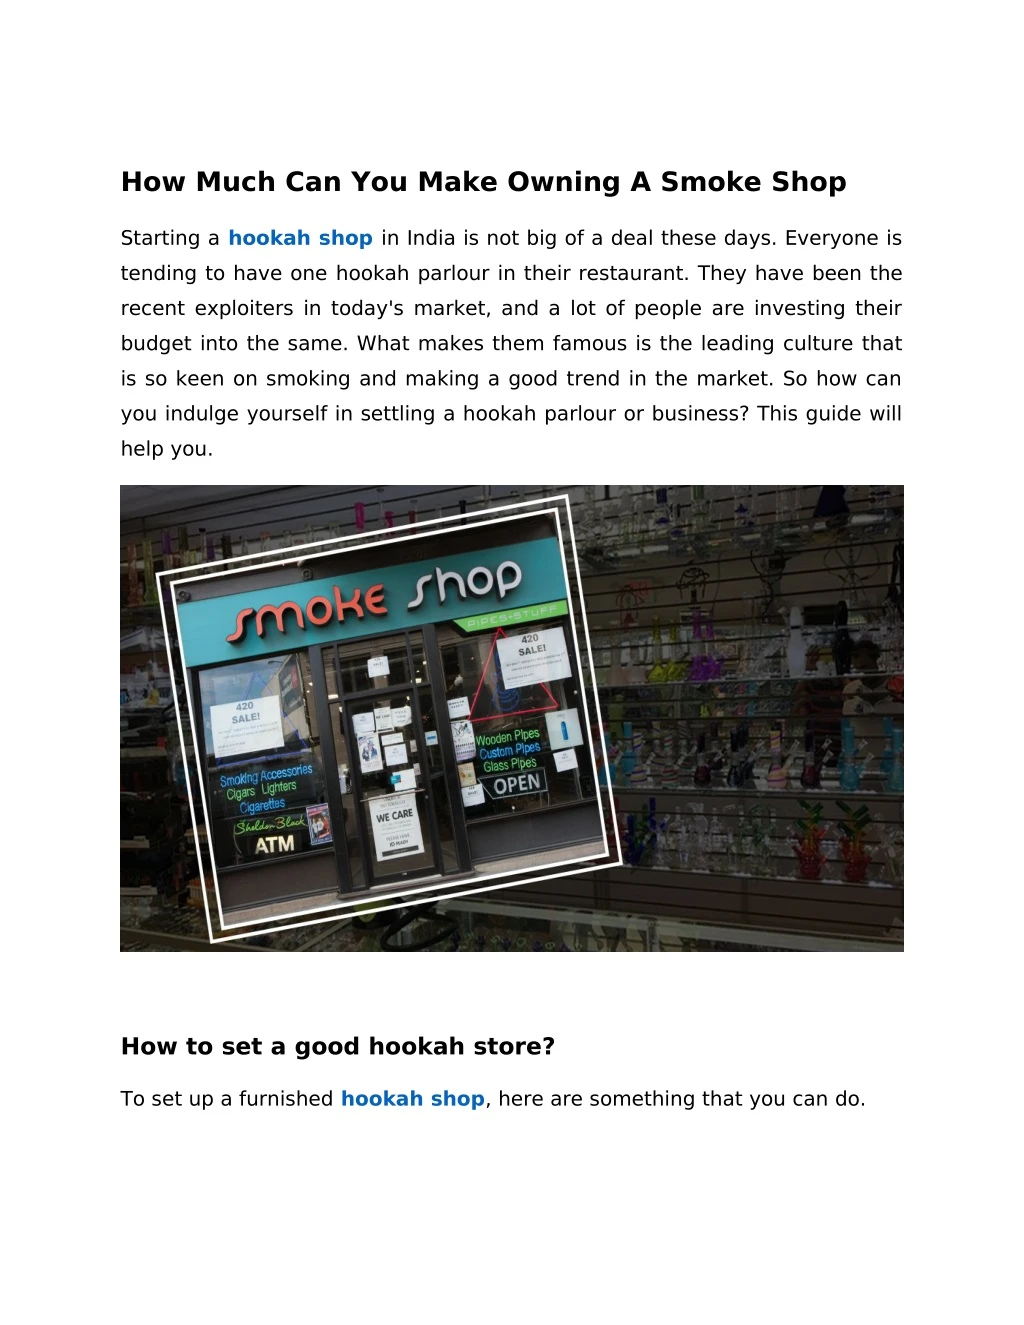 how much can you make owning a smoke shop